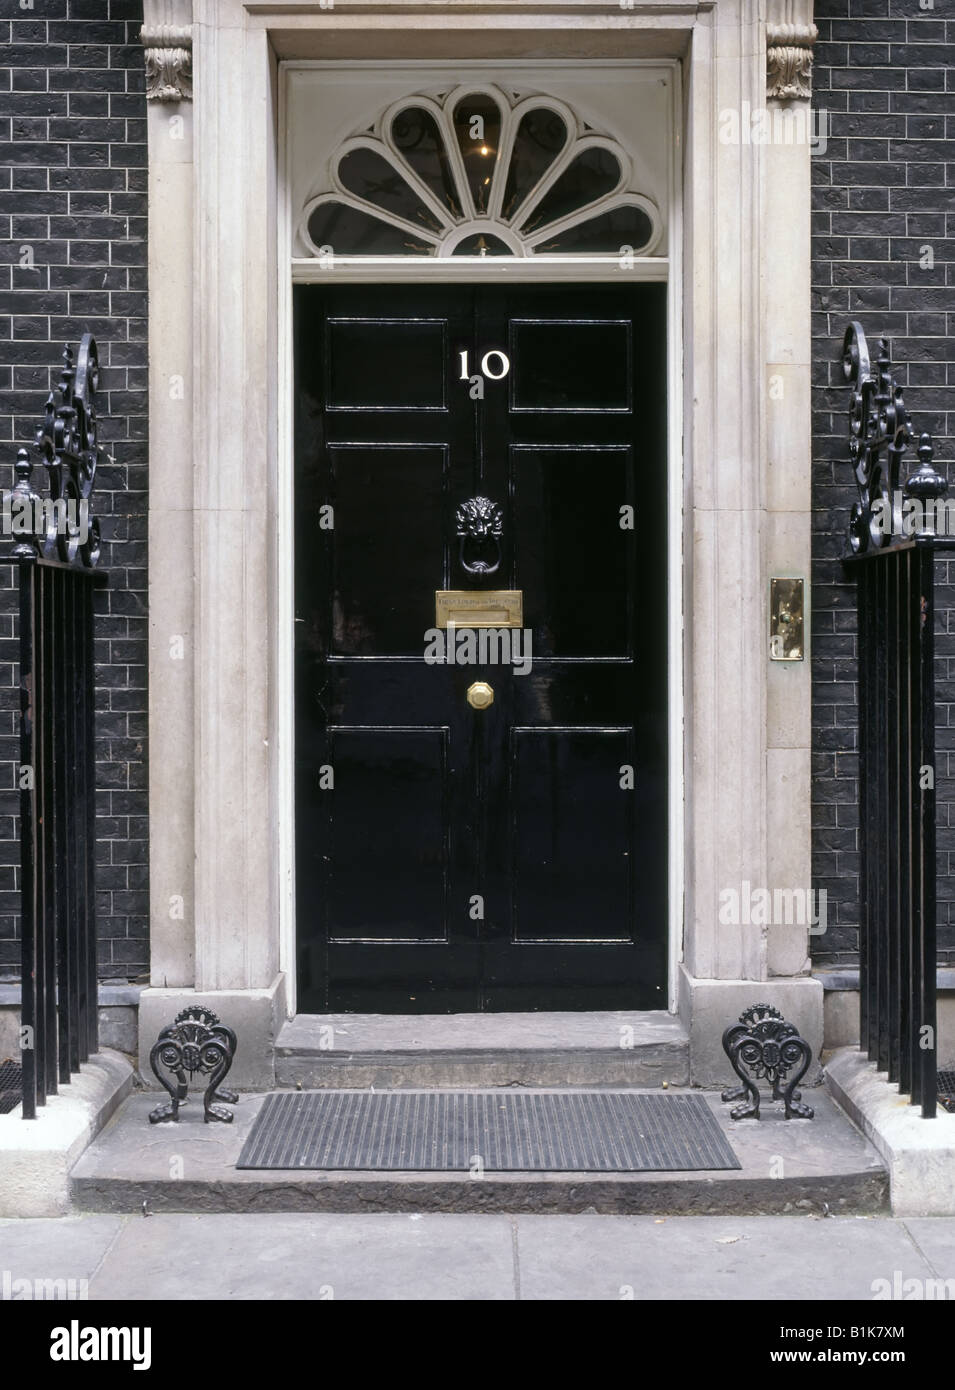 Close up of 10 Downing Street black door entrance to the official residence of the Prime Minister in Whitehall district Westminster London England UK Stock Photo